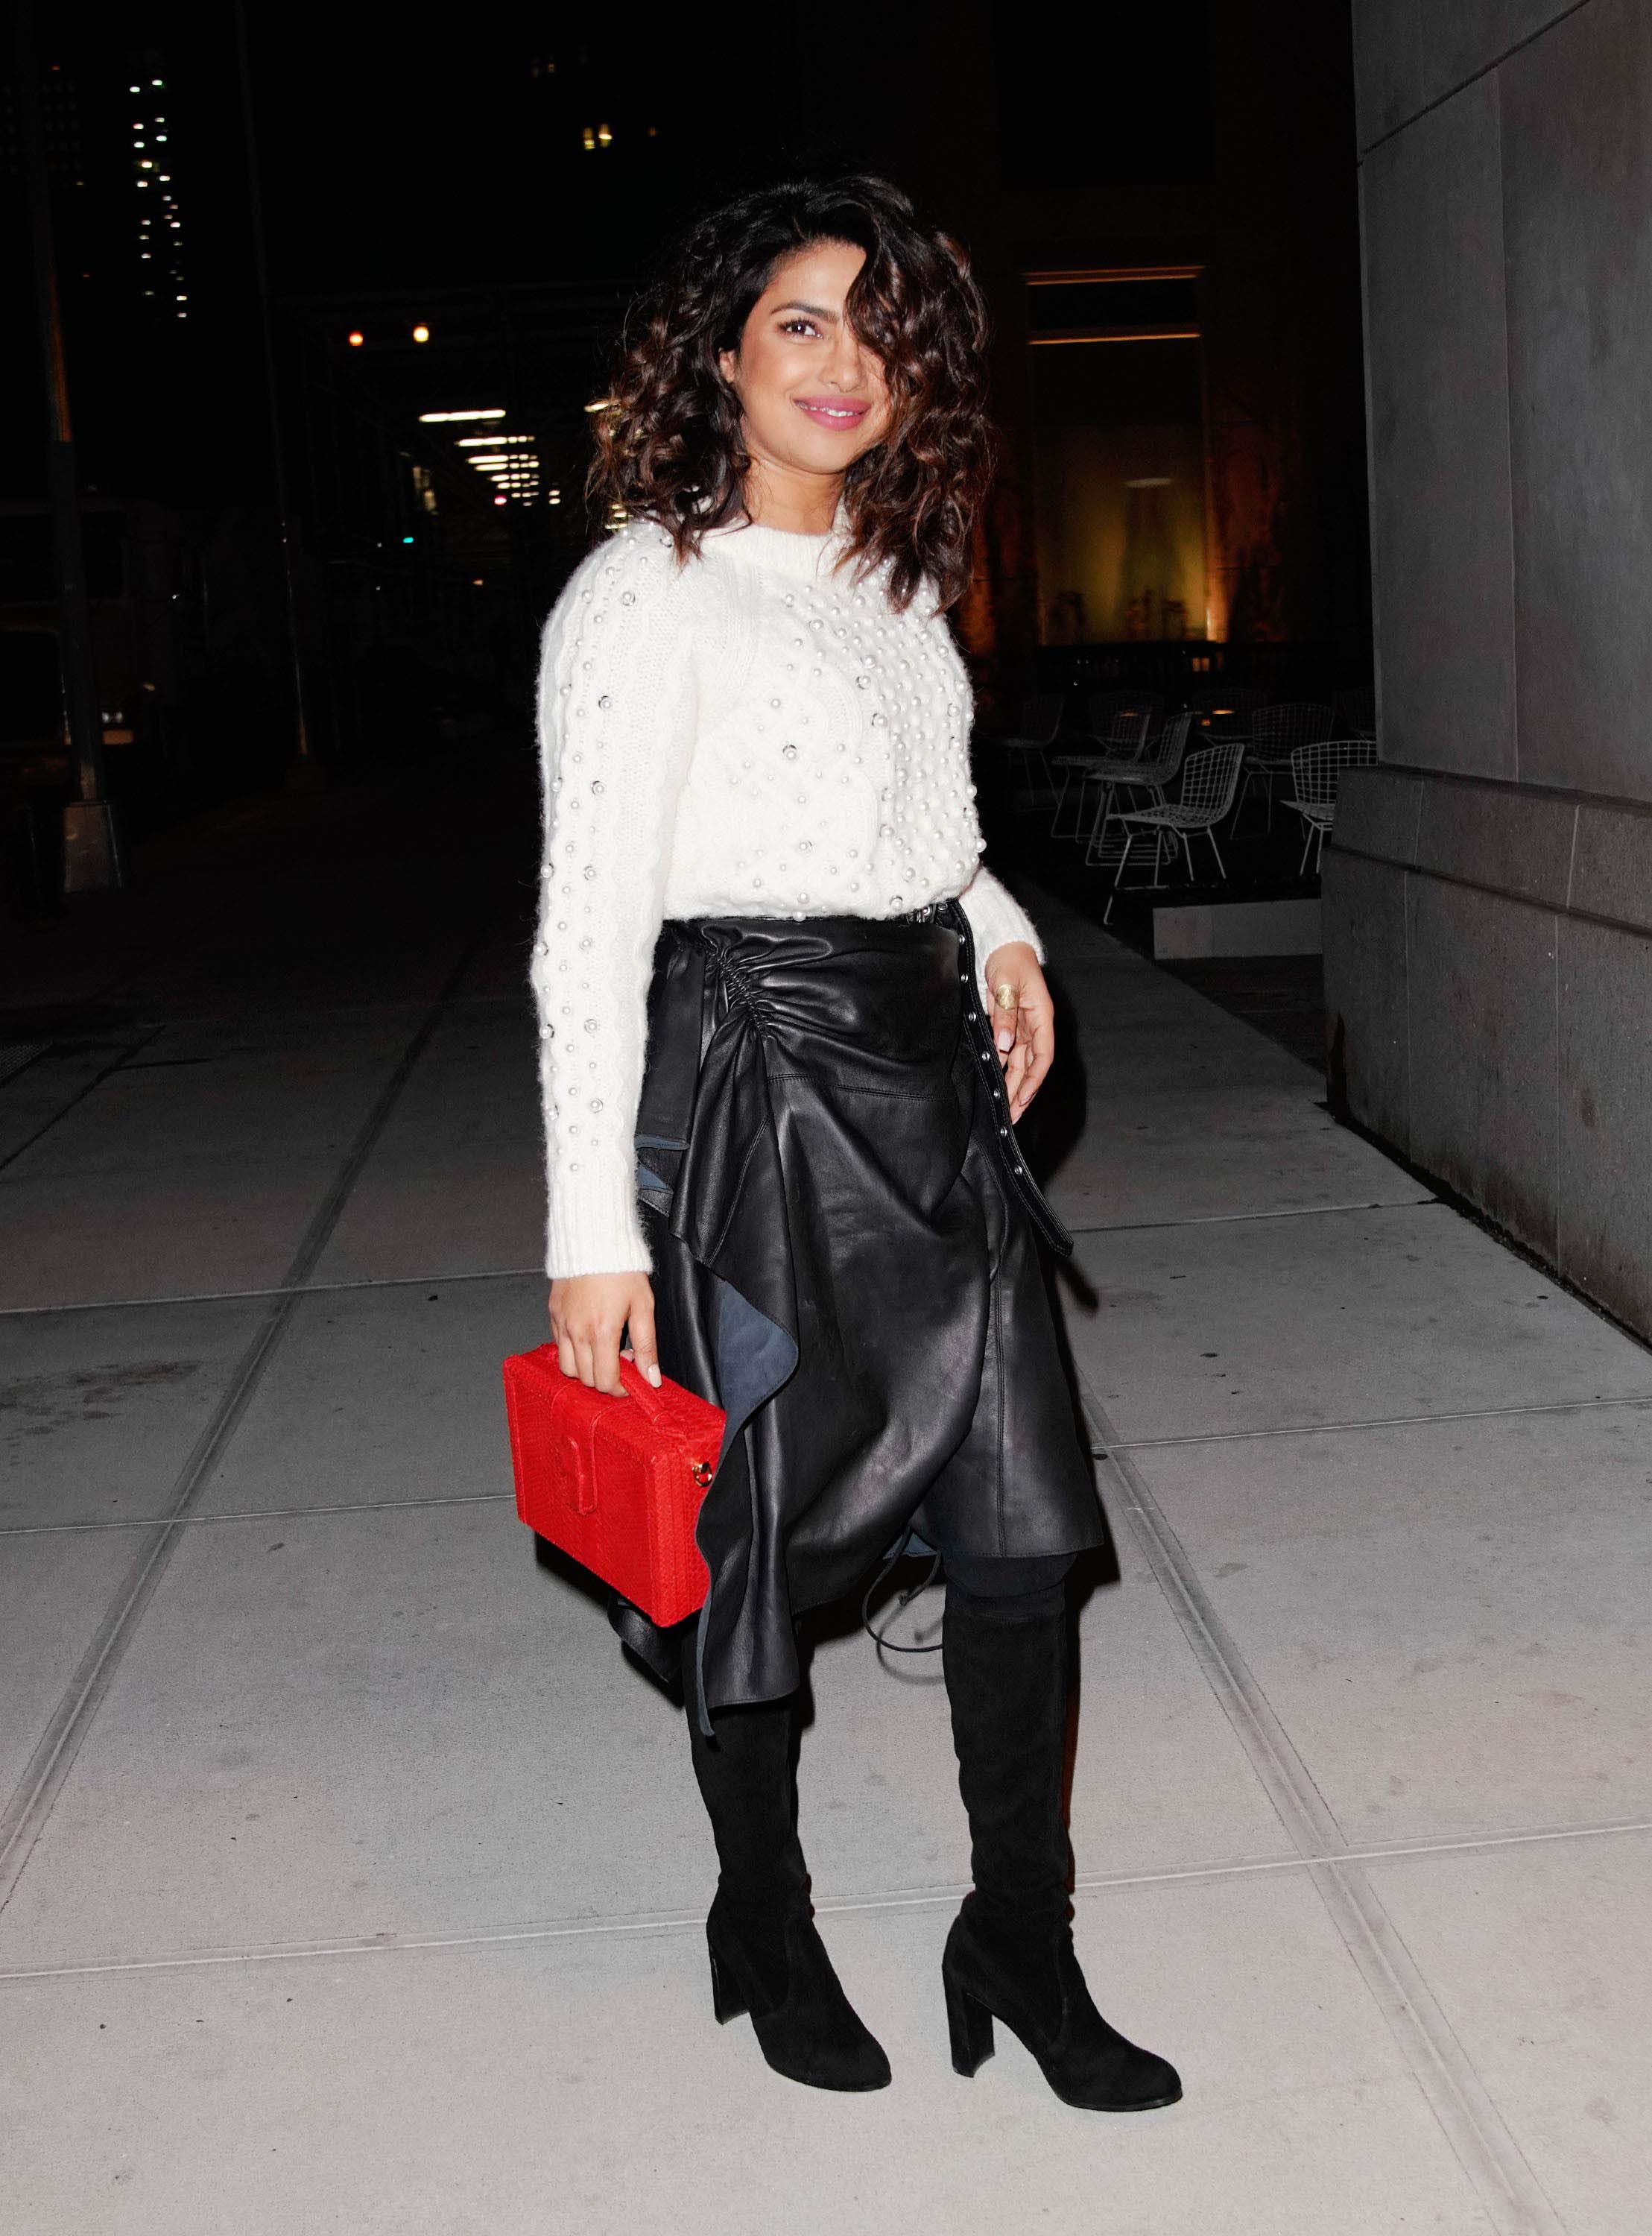 Priyanka Chopra out and about in New York